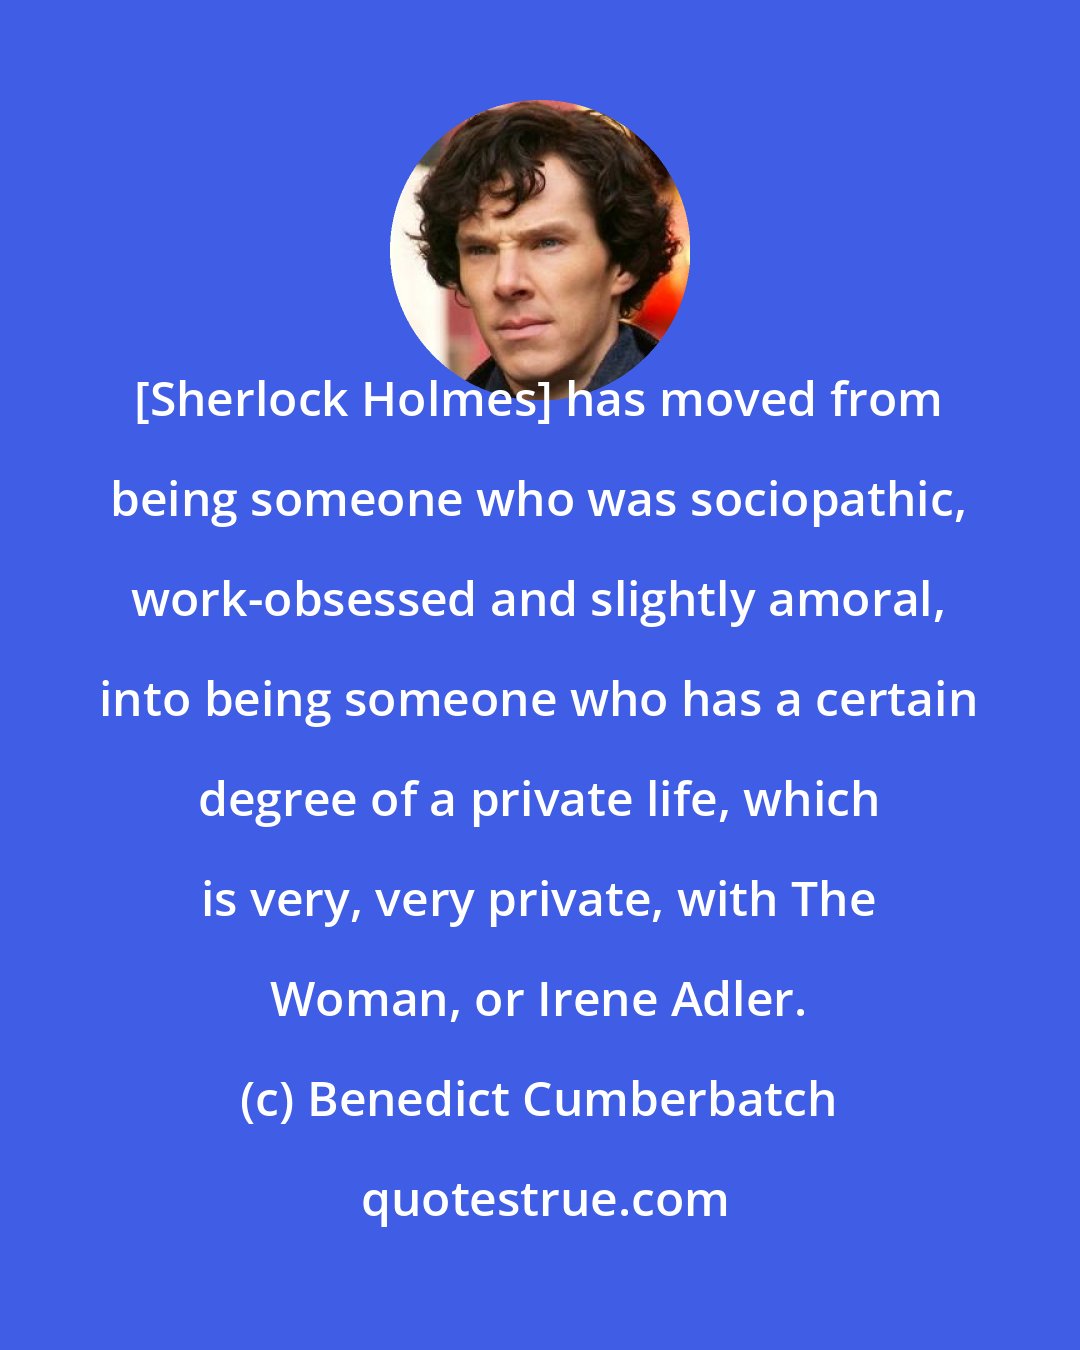 Benedict Cumberbatch: [Sherlock Holmes] has moved from being someone who was sociopathic, work-obsessed and slightly amoral, into being someone who has a certain degree of a private life, which is very, very private, with The Woman, or Irene Adler.